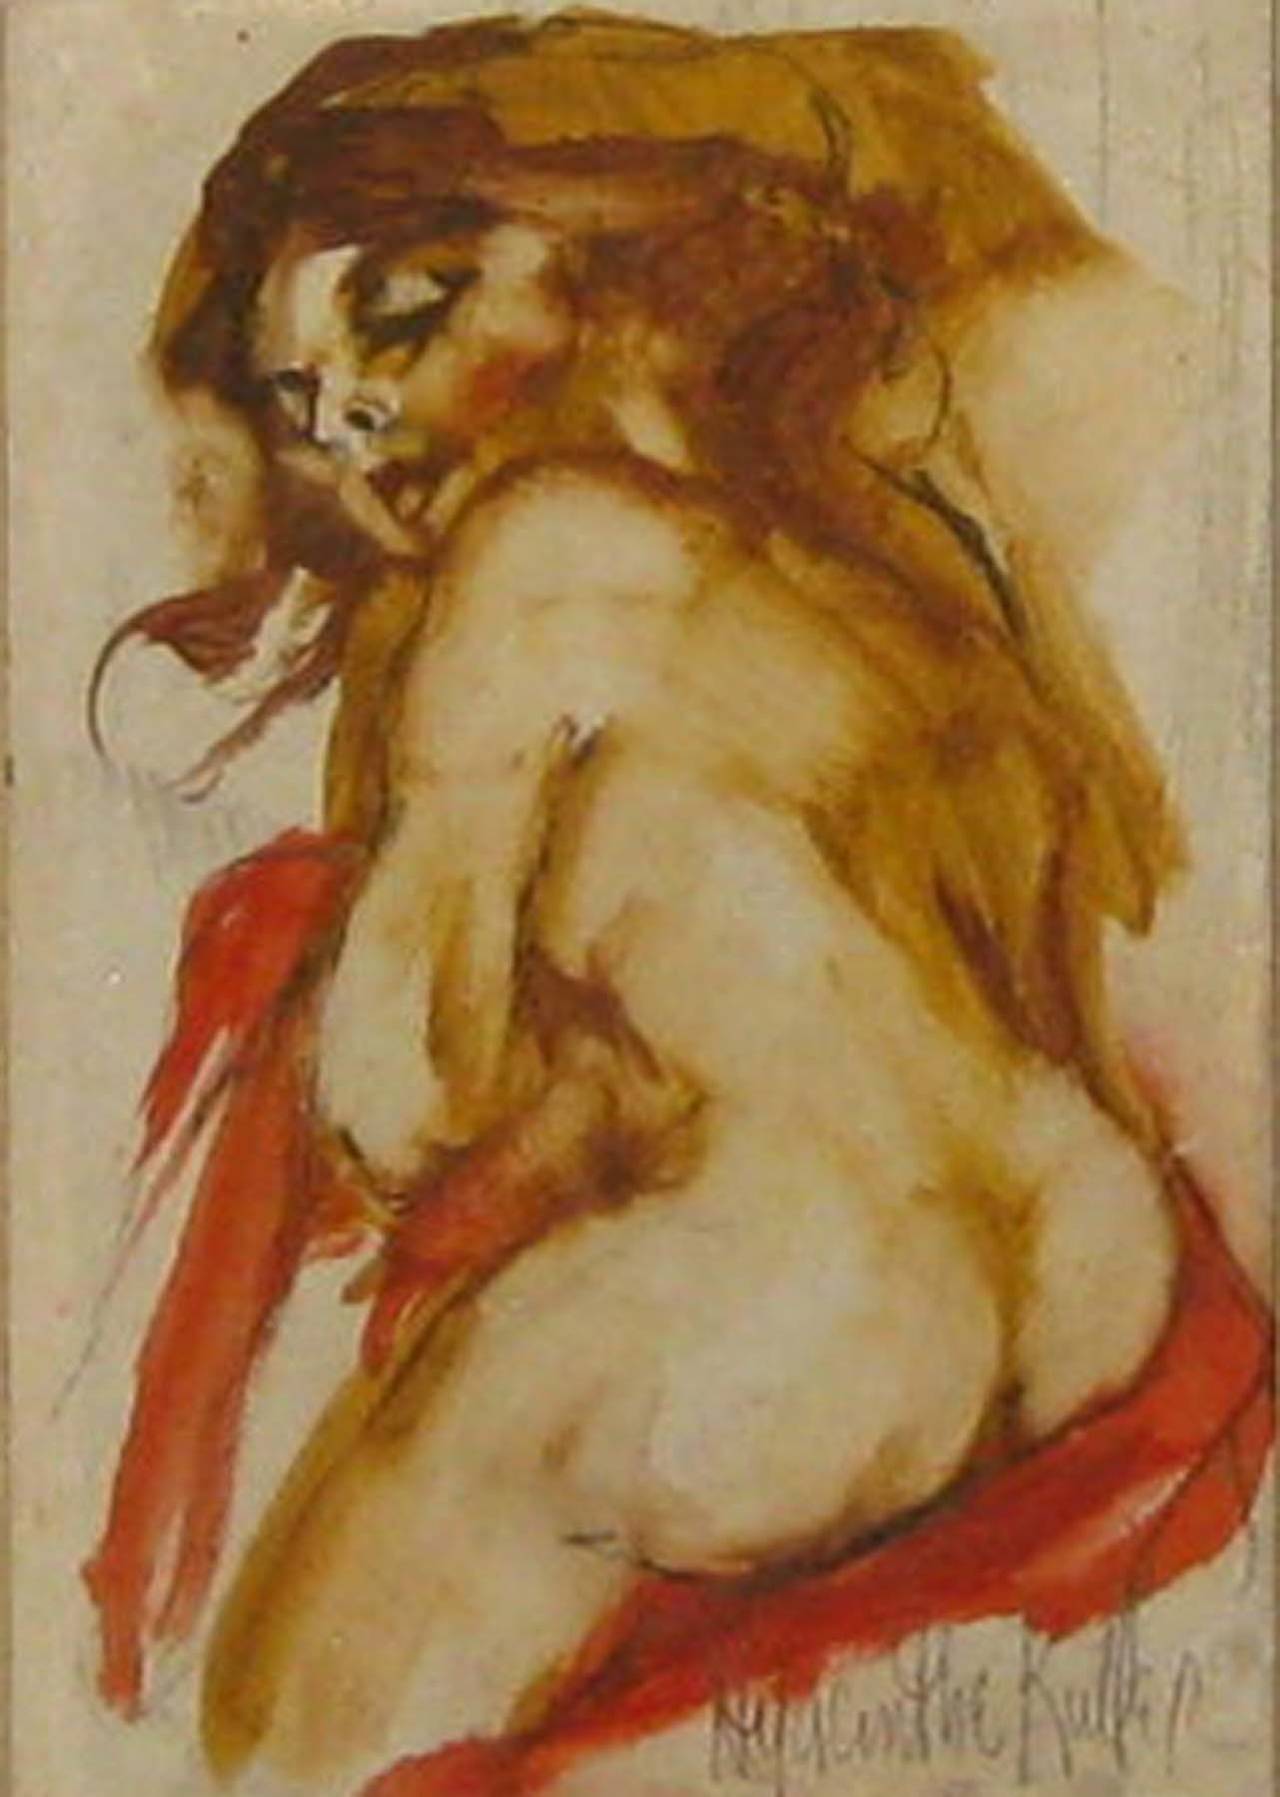 Nude - Painting by HYACINTHE KULLER BARON